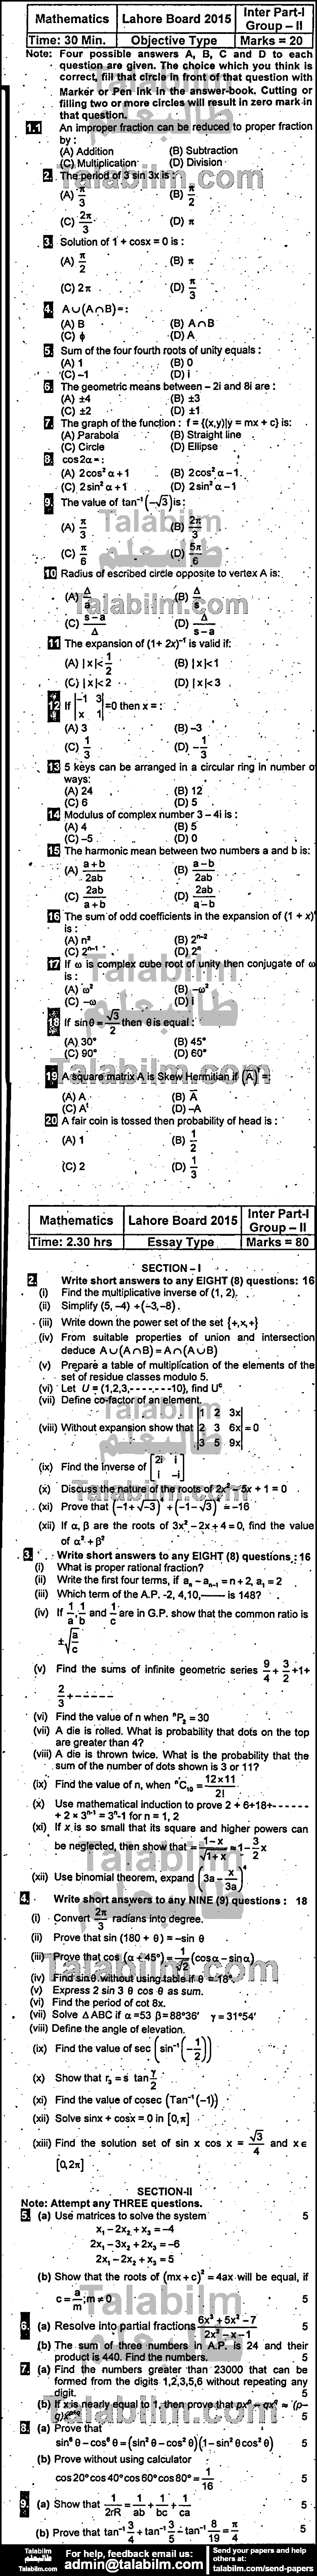 Math 0 past paper for Group-II 2015